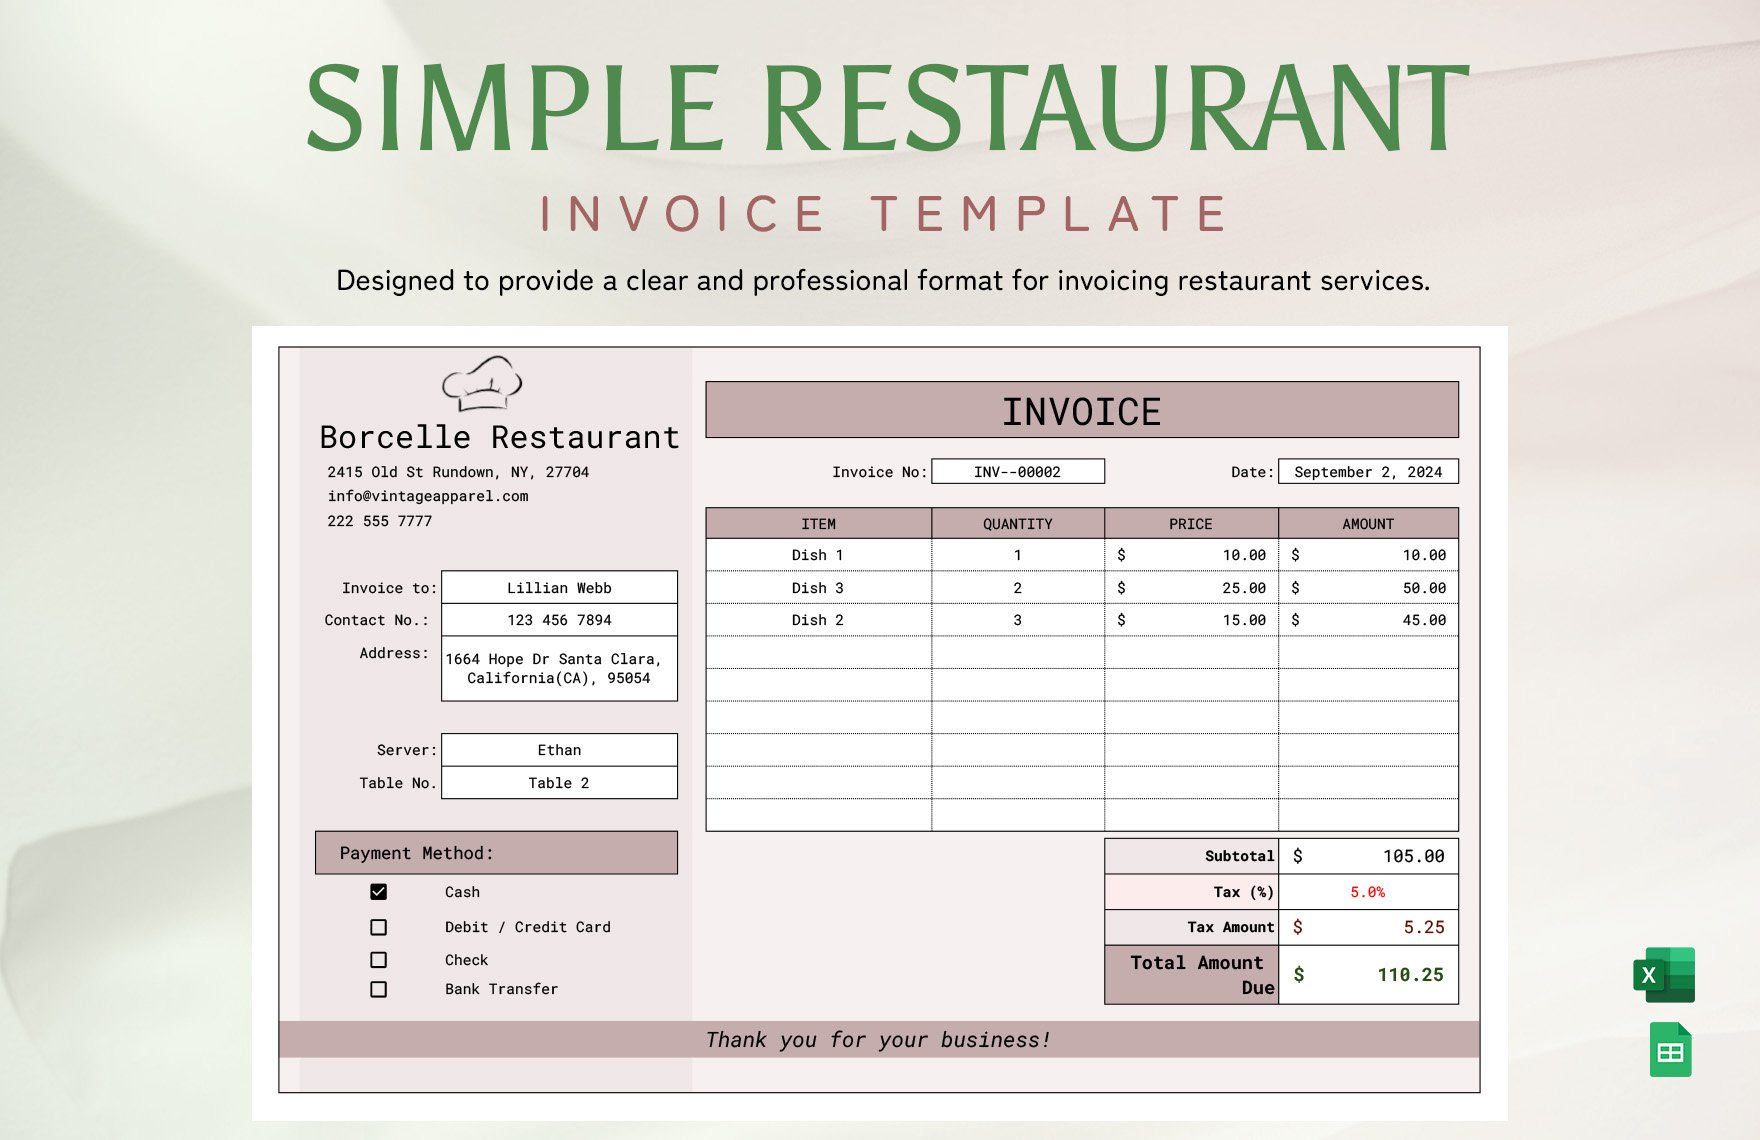 Free Simple Restaurant Invoice Template in Excel, Google Sheets